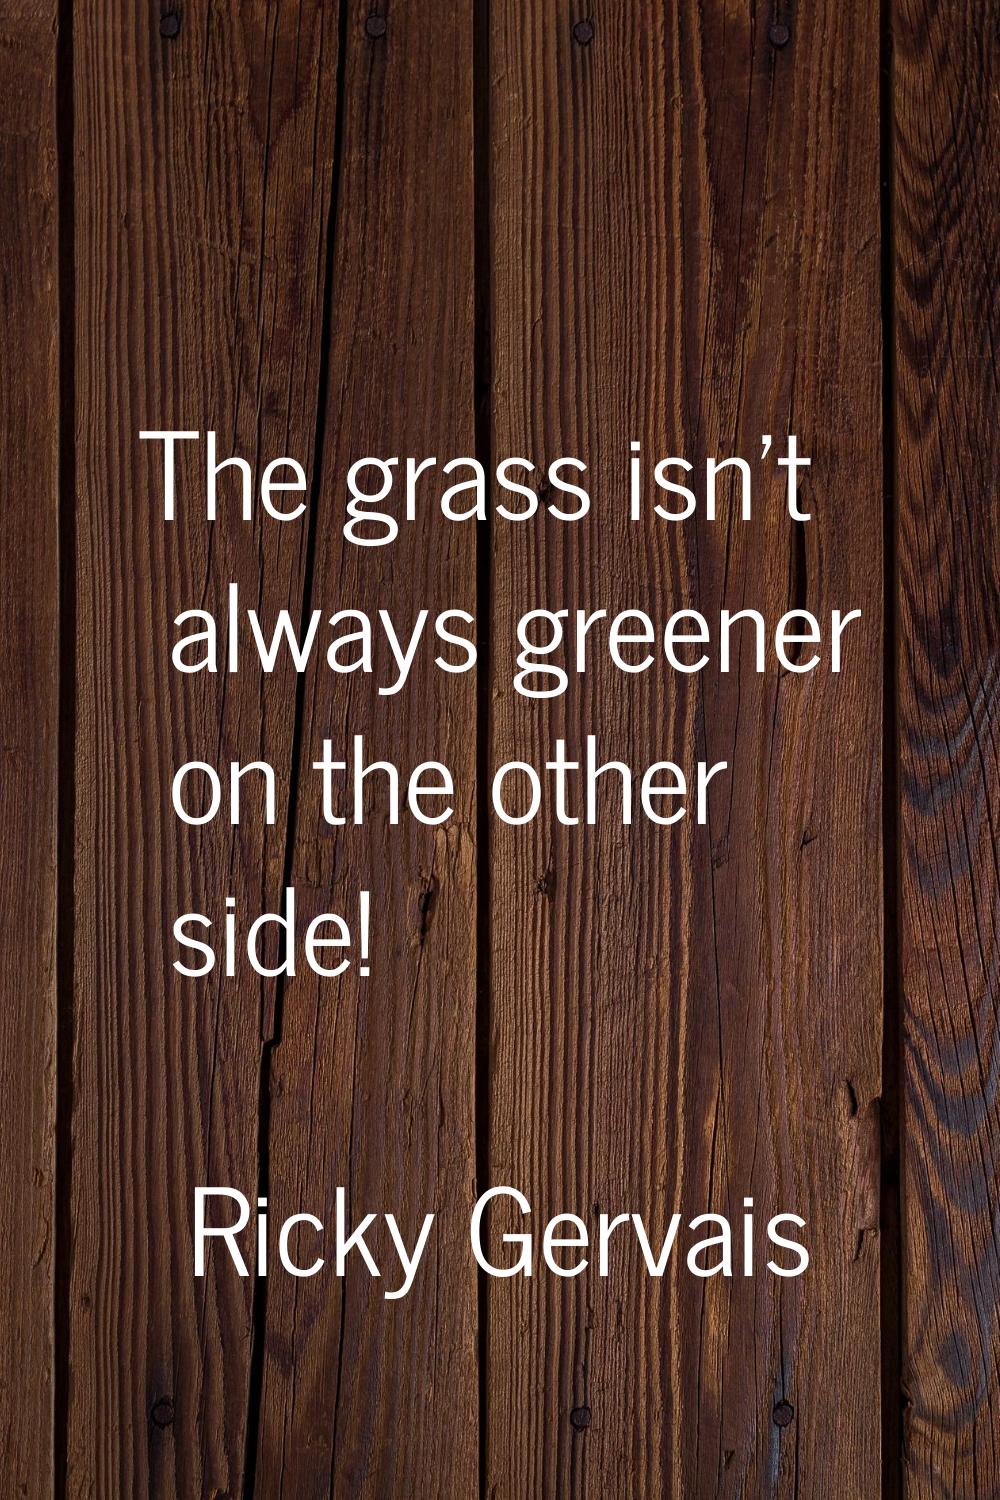 The grass isn't always greener on the other side!